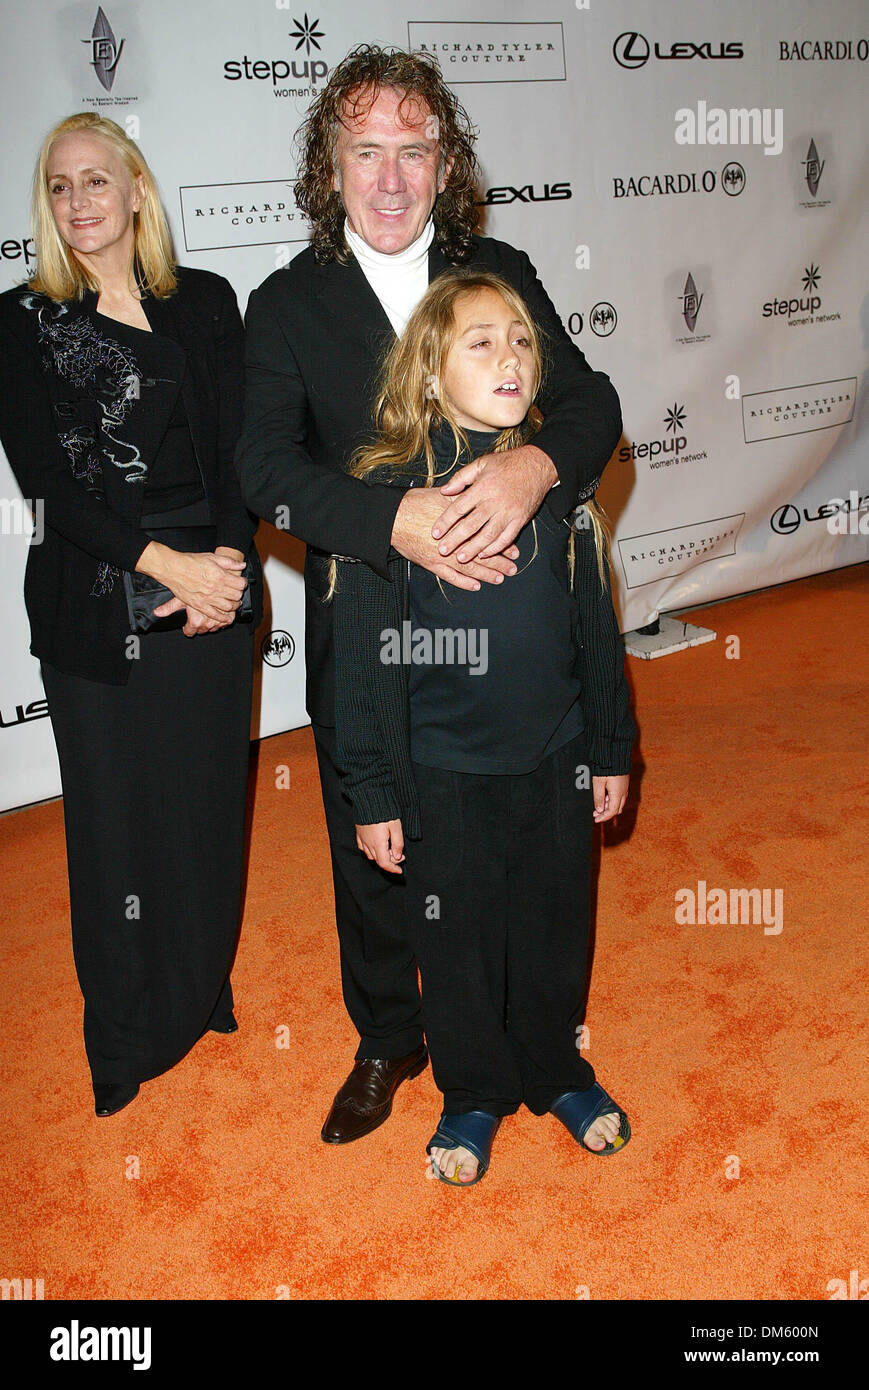 Oct. 11, 2002 - Hollywood, CALIFORNIA - DESIGNER RICHARD TYLER HIS AND  SON..AN EVENING OF FASHION & MUSIC.PRESENTED BY LEXUS AND STEP UP WOMEN'S  NETWORK.AT JIM HENSON STUDIOS IN HOLLYWOOD, CA. FITZROY